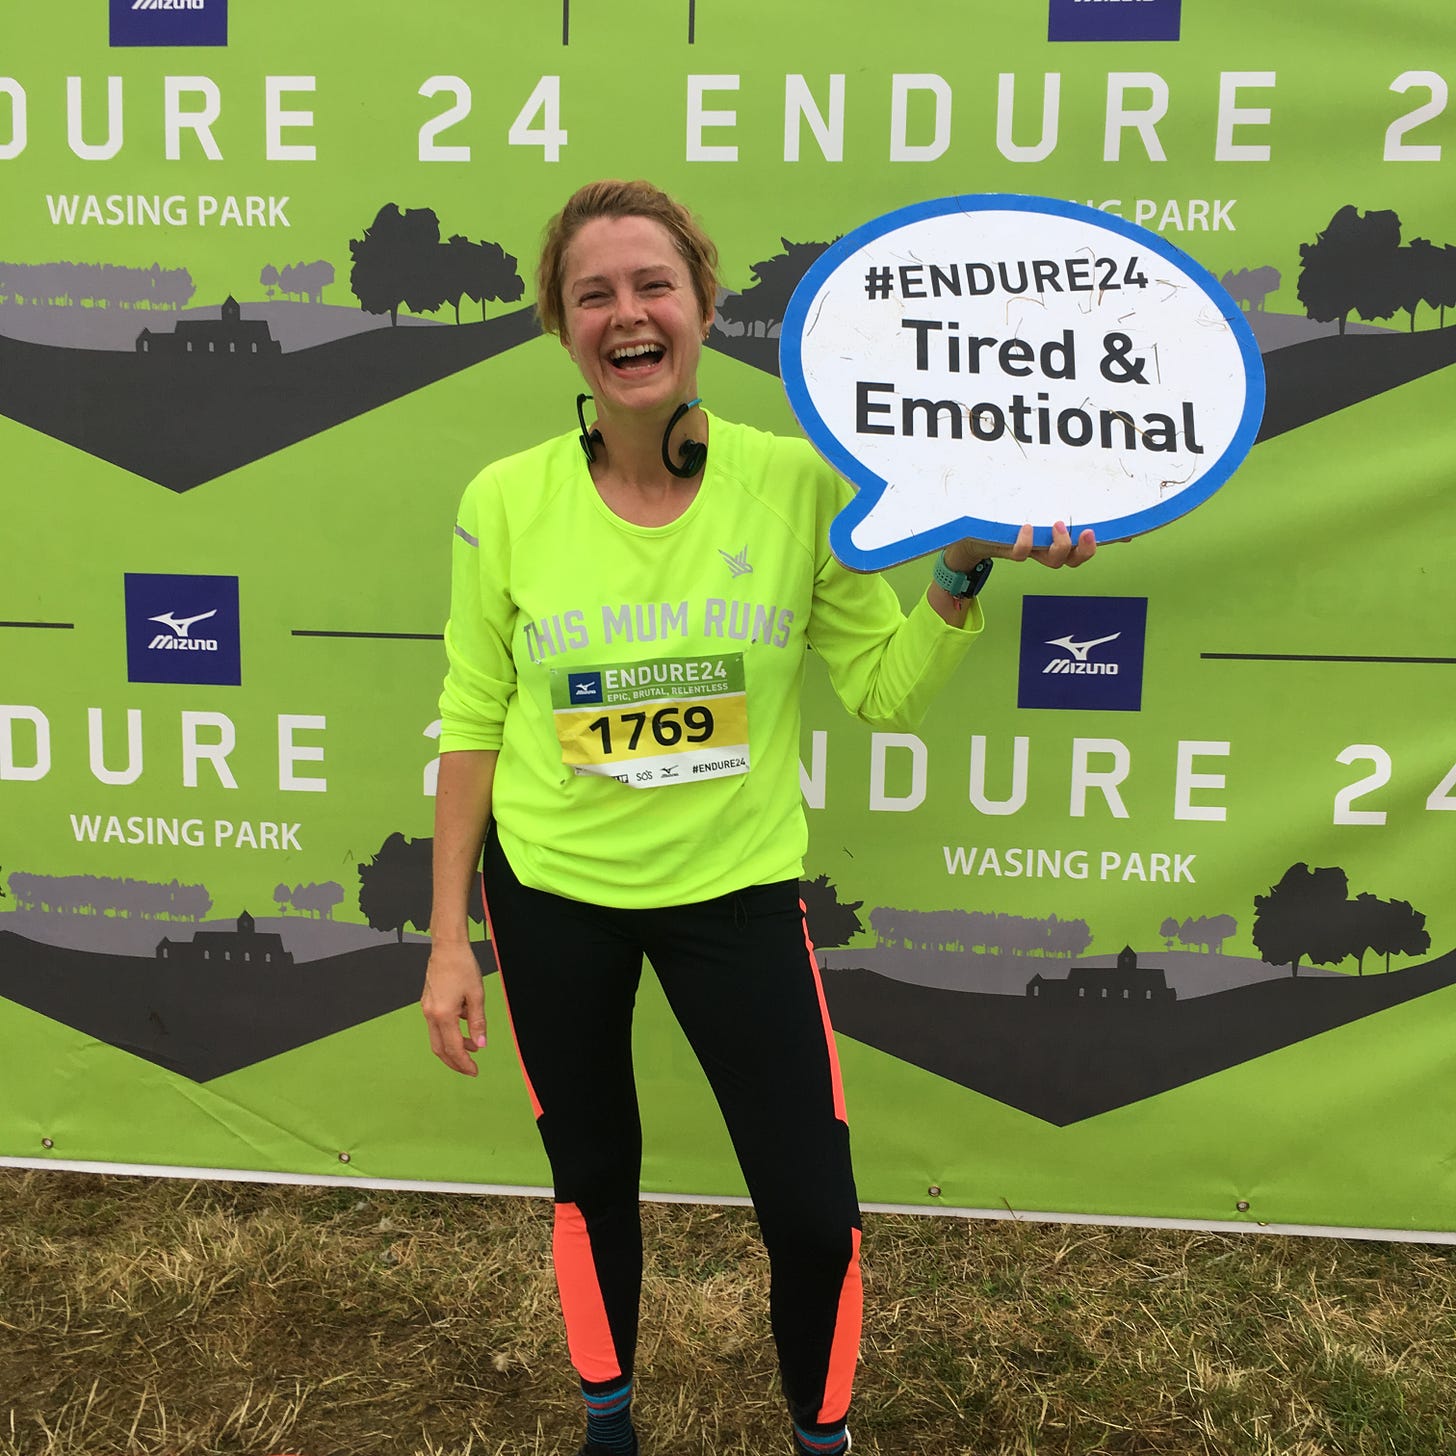 Jane holding a cardboard cut out saying 'tired & emotional' after running at Endure24